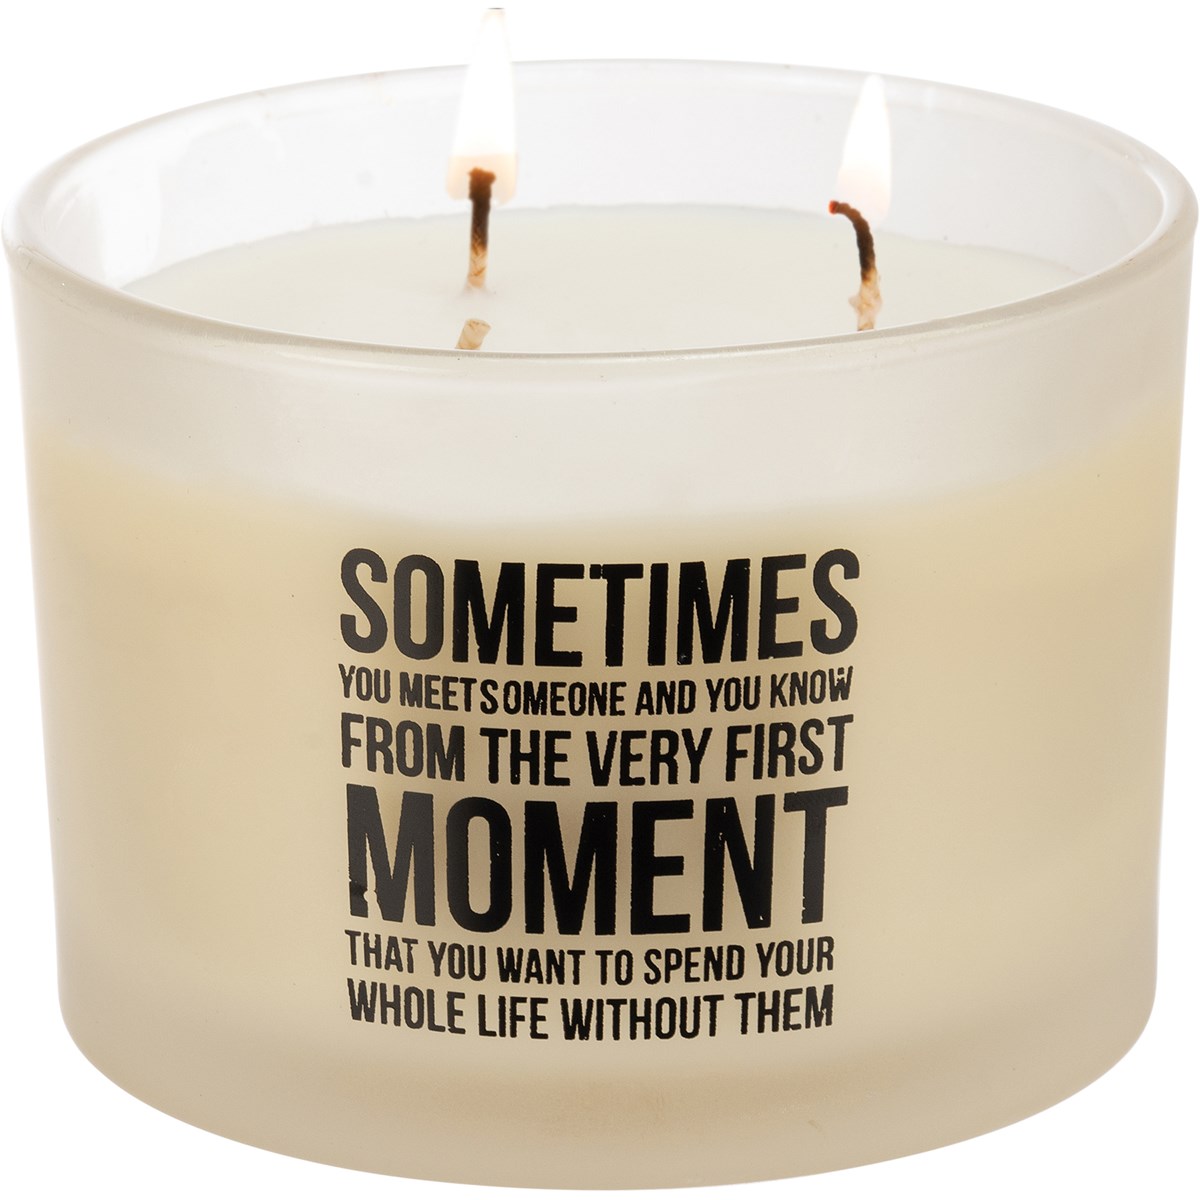 Spend Your Whole Life Without Them Jar Candle - Soy Wax, Glass, Cotton